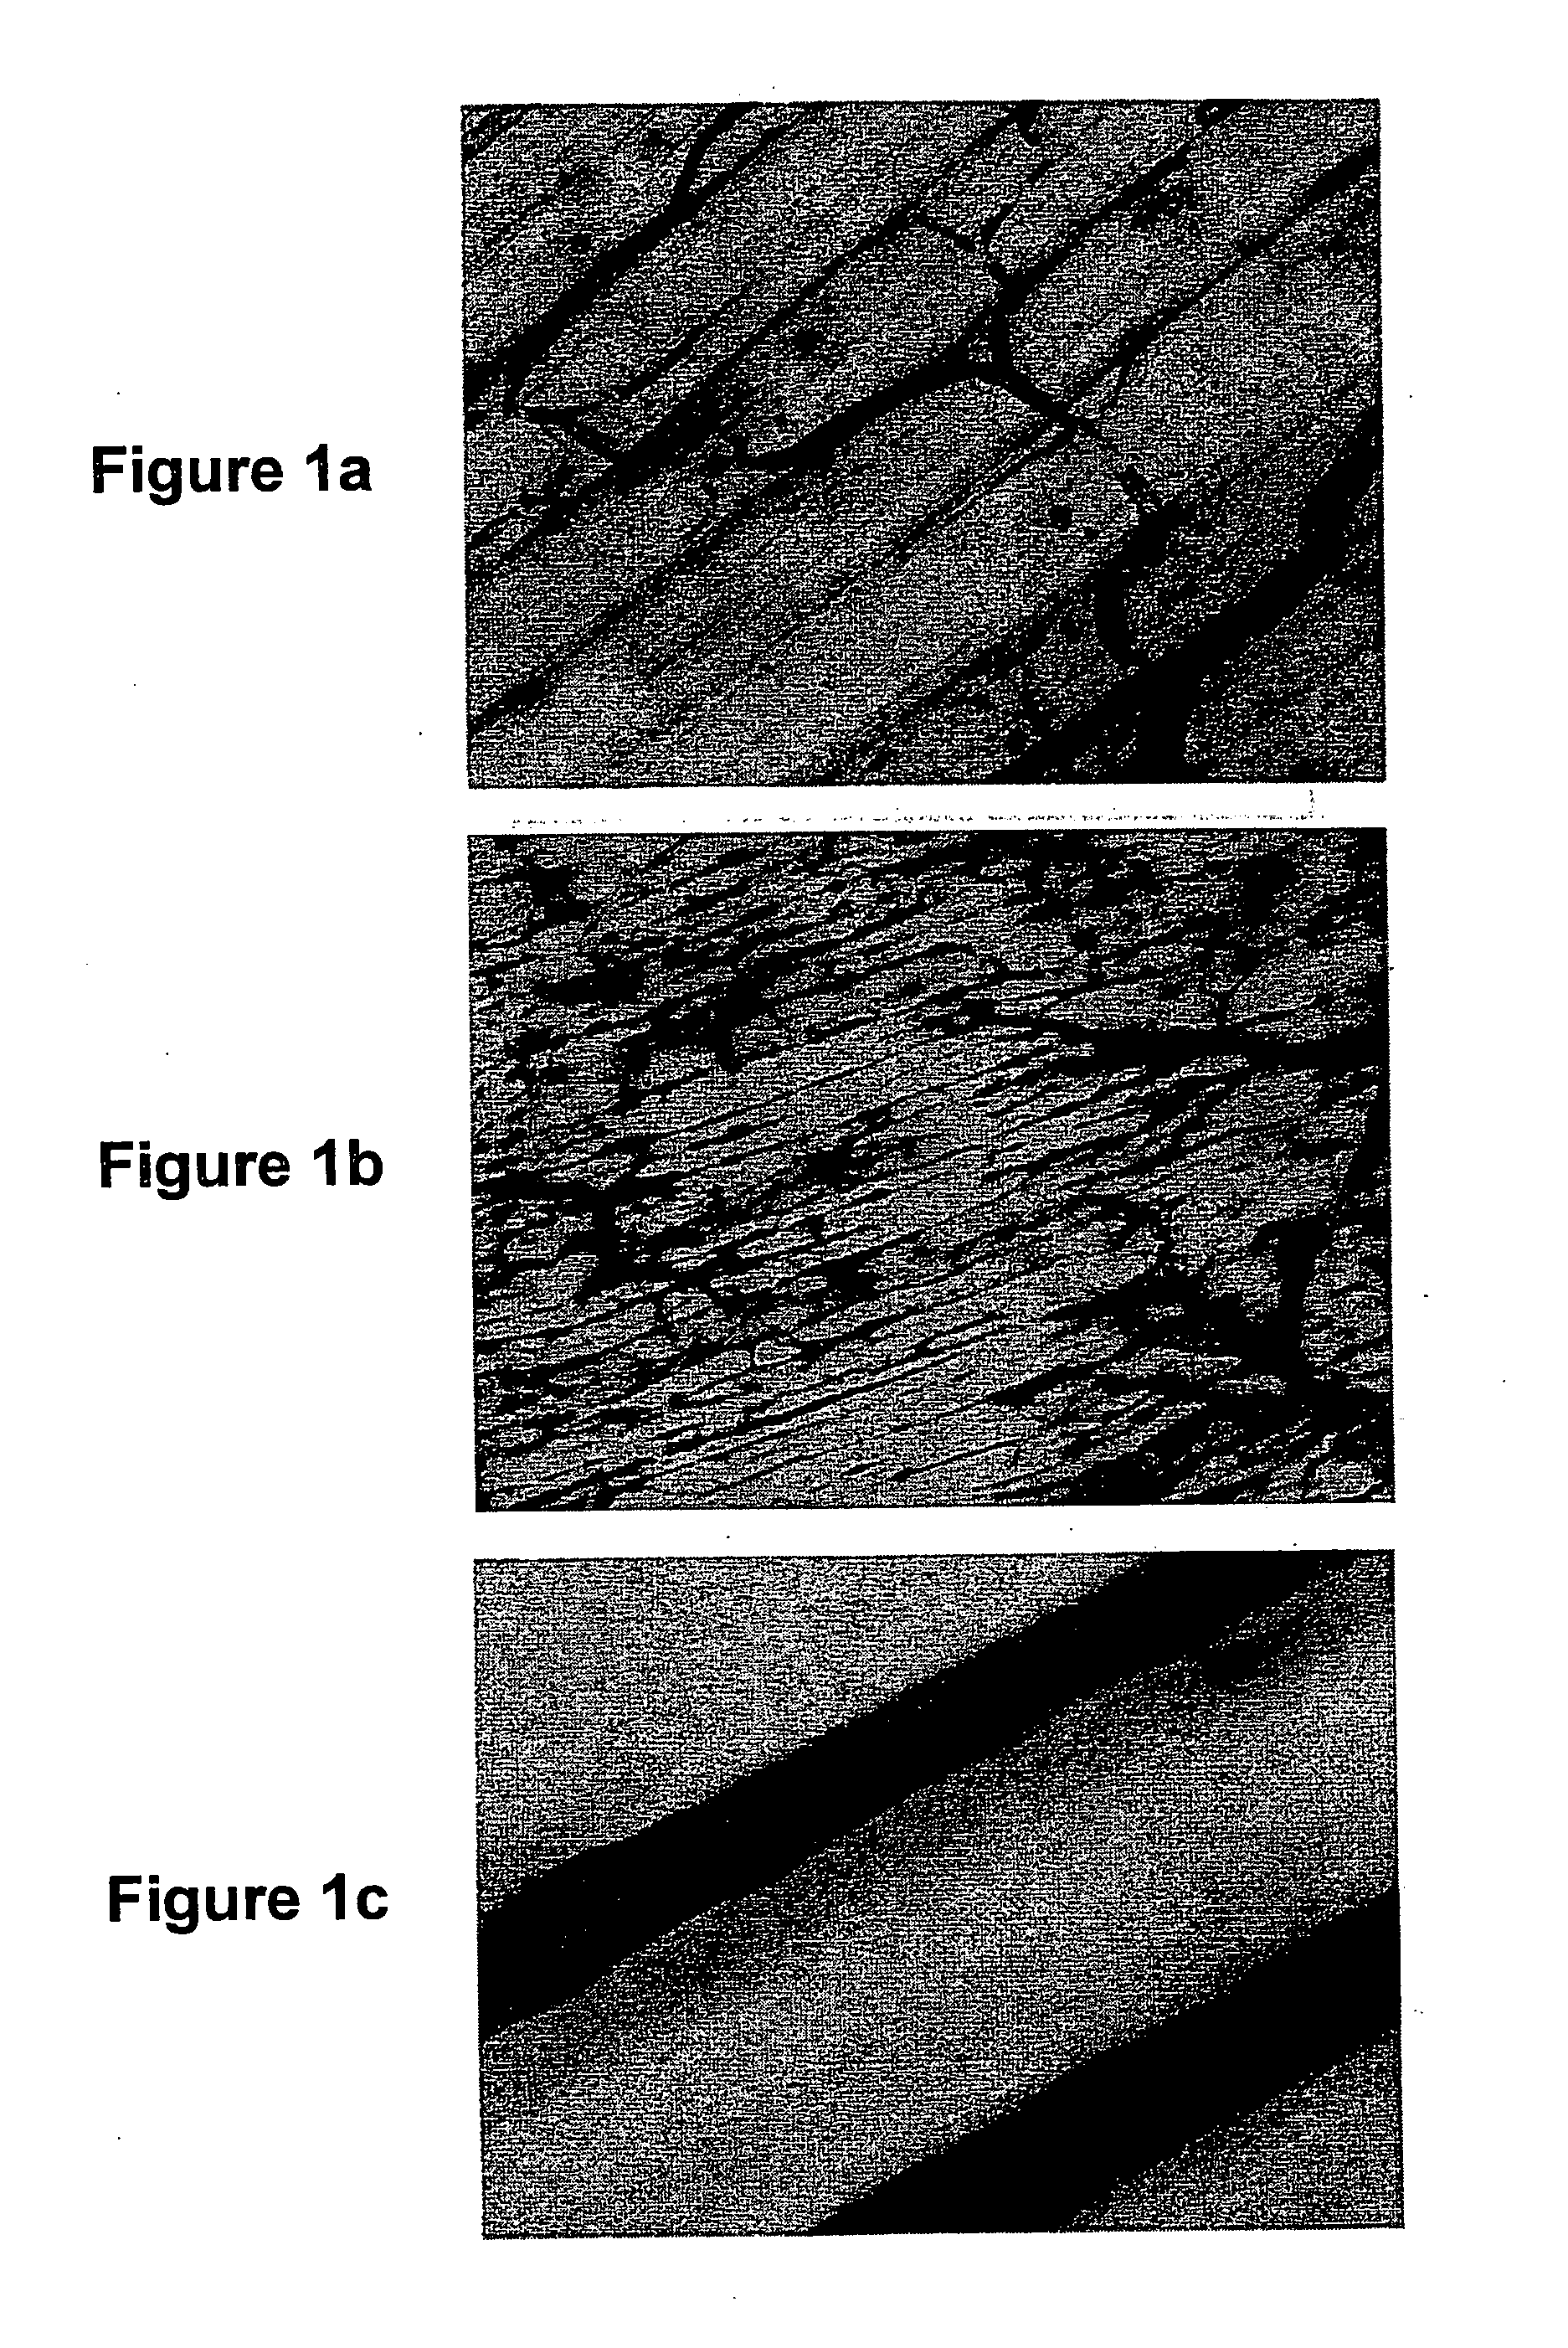 Compositions, kits, methods, and apparatus for transvascular delivery of a composition to an extravascular tissue of a mammal